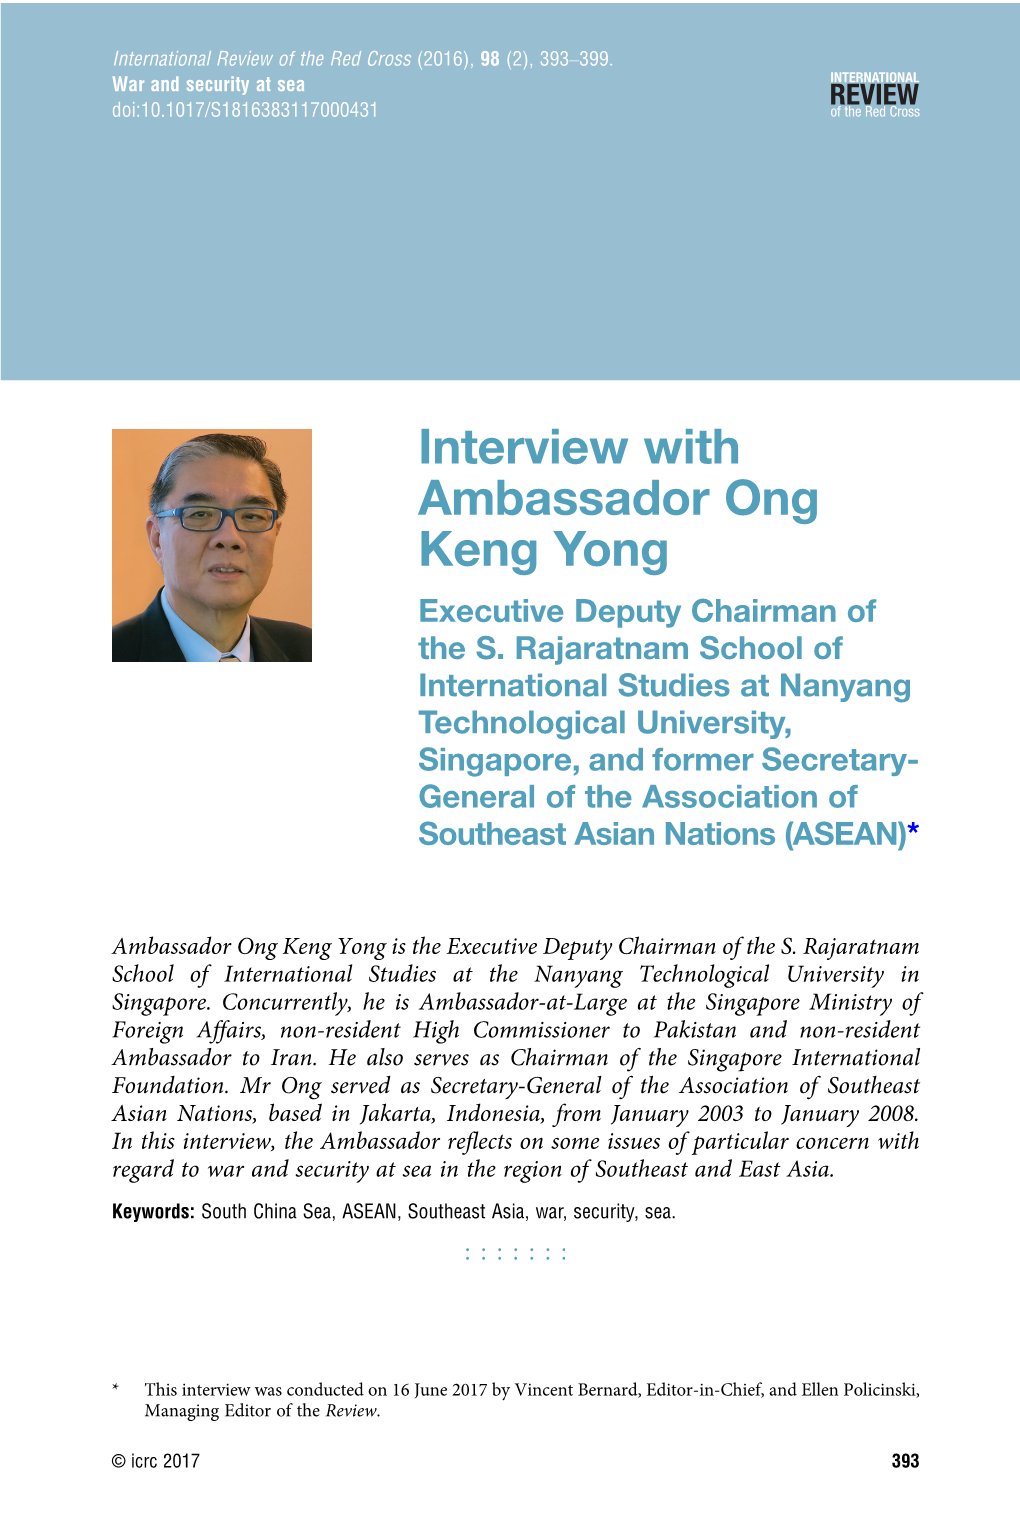 Interview with Ambassador Ong Keng Yong Executive Deputy Chairman of the S